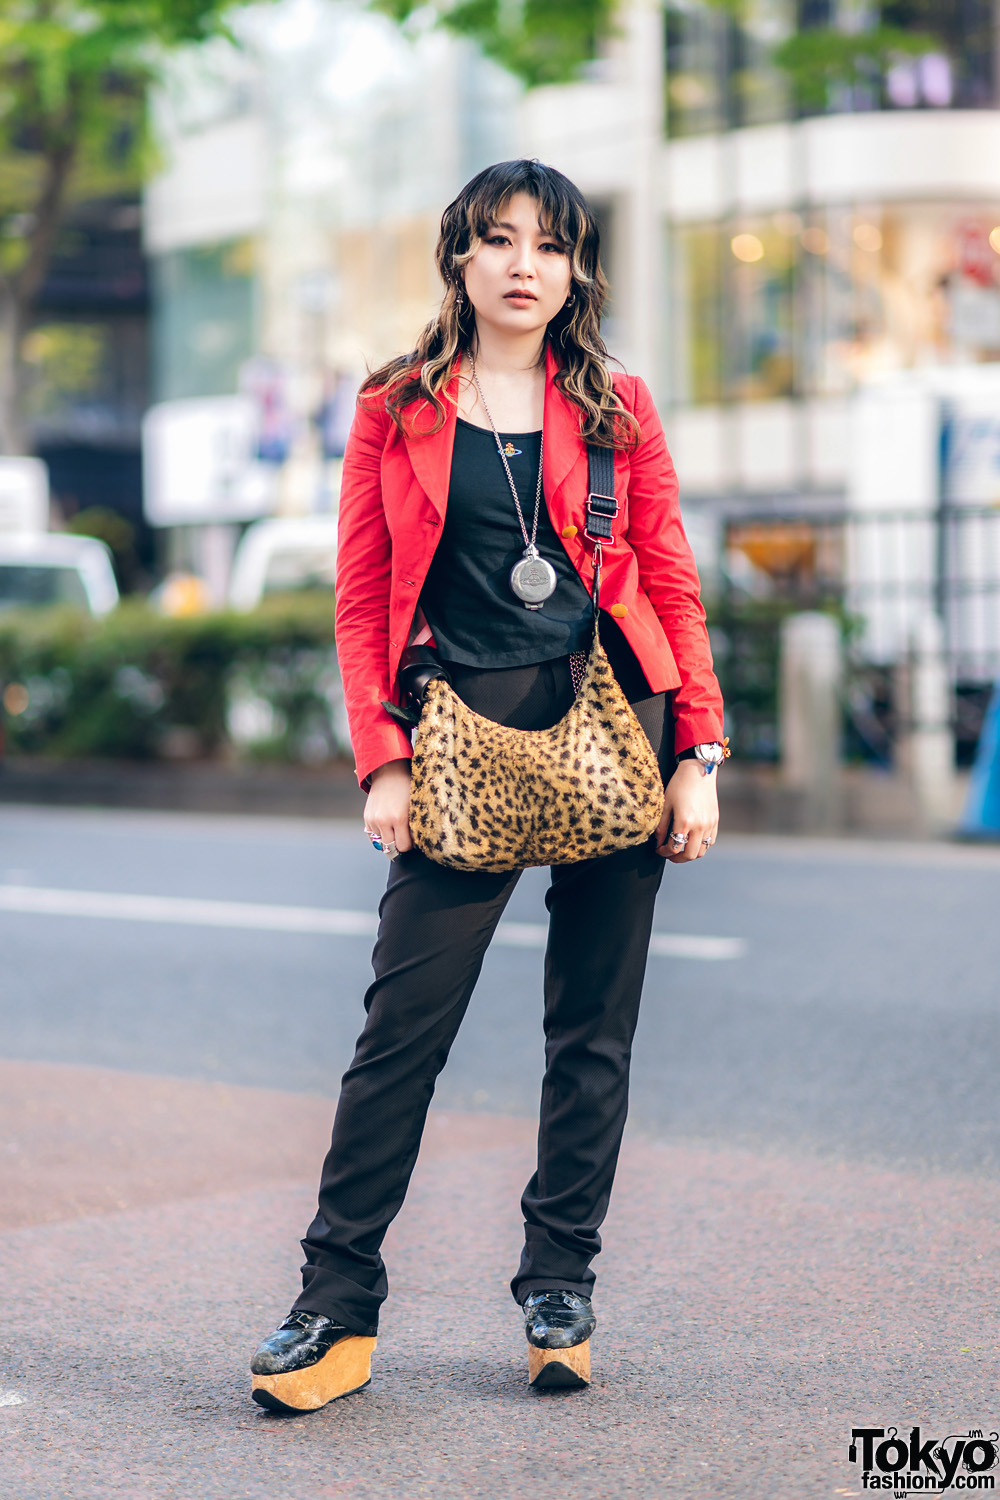 Dress Designer's Contemporary Street Style w/ Curly Hair, Jean Paul Gaultier Pants, Deaf Breed, Vivienne Westwood Furry Leopard Print Bag & Rocking Horse Shoes